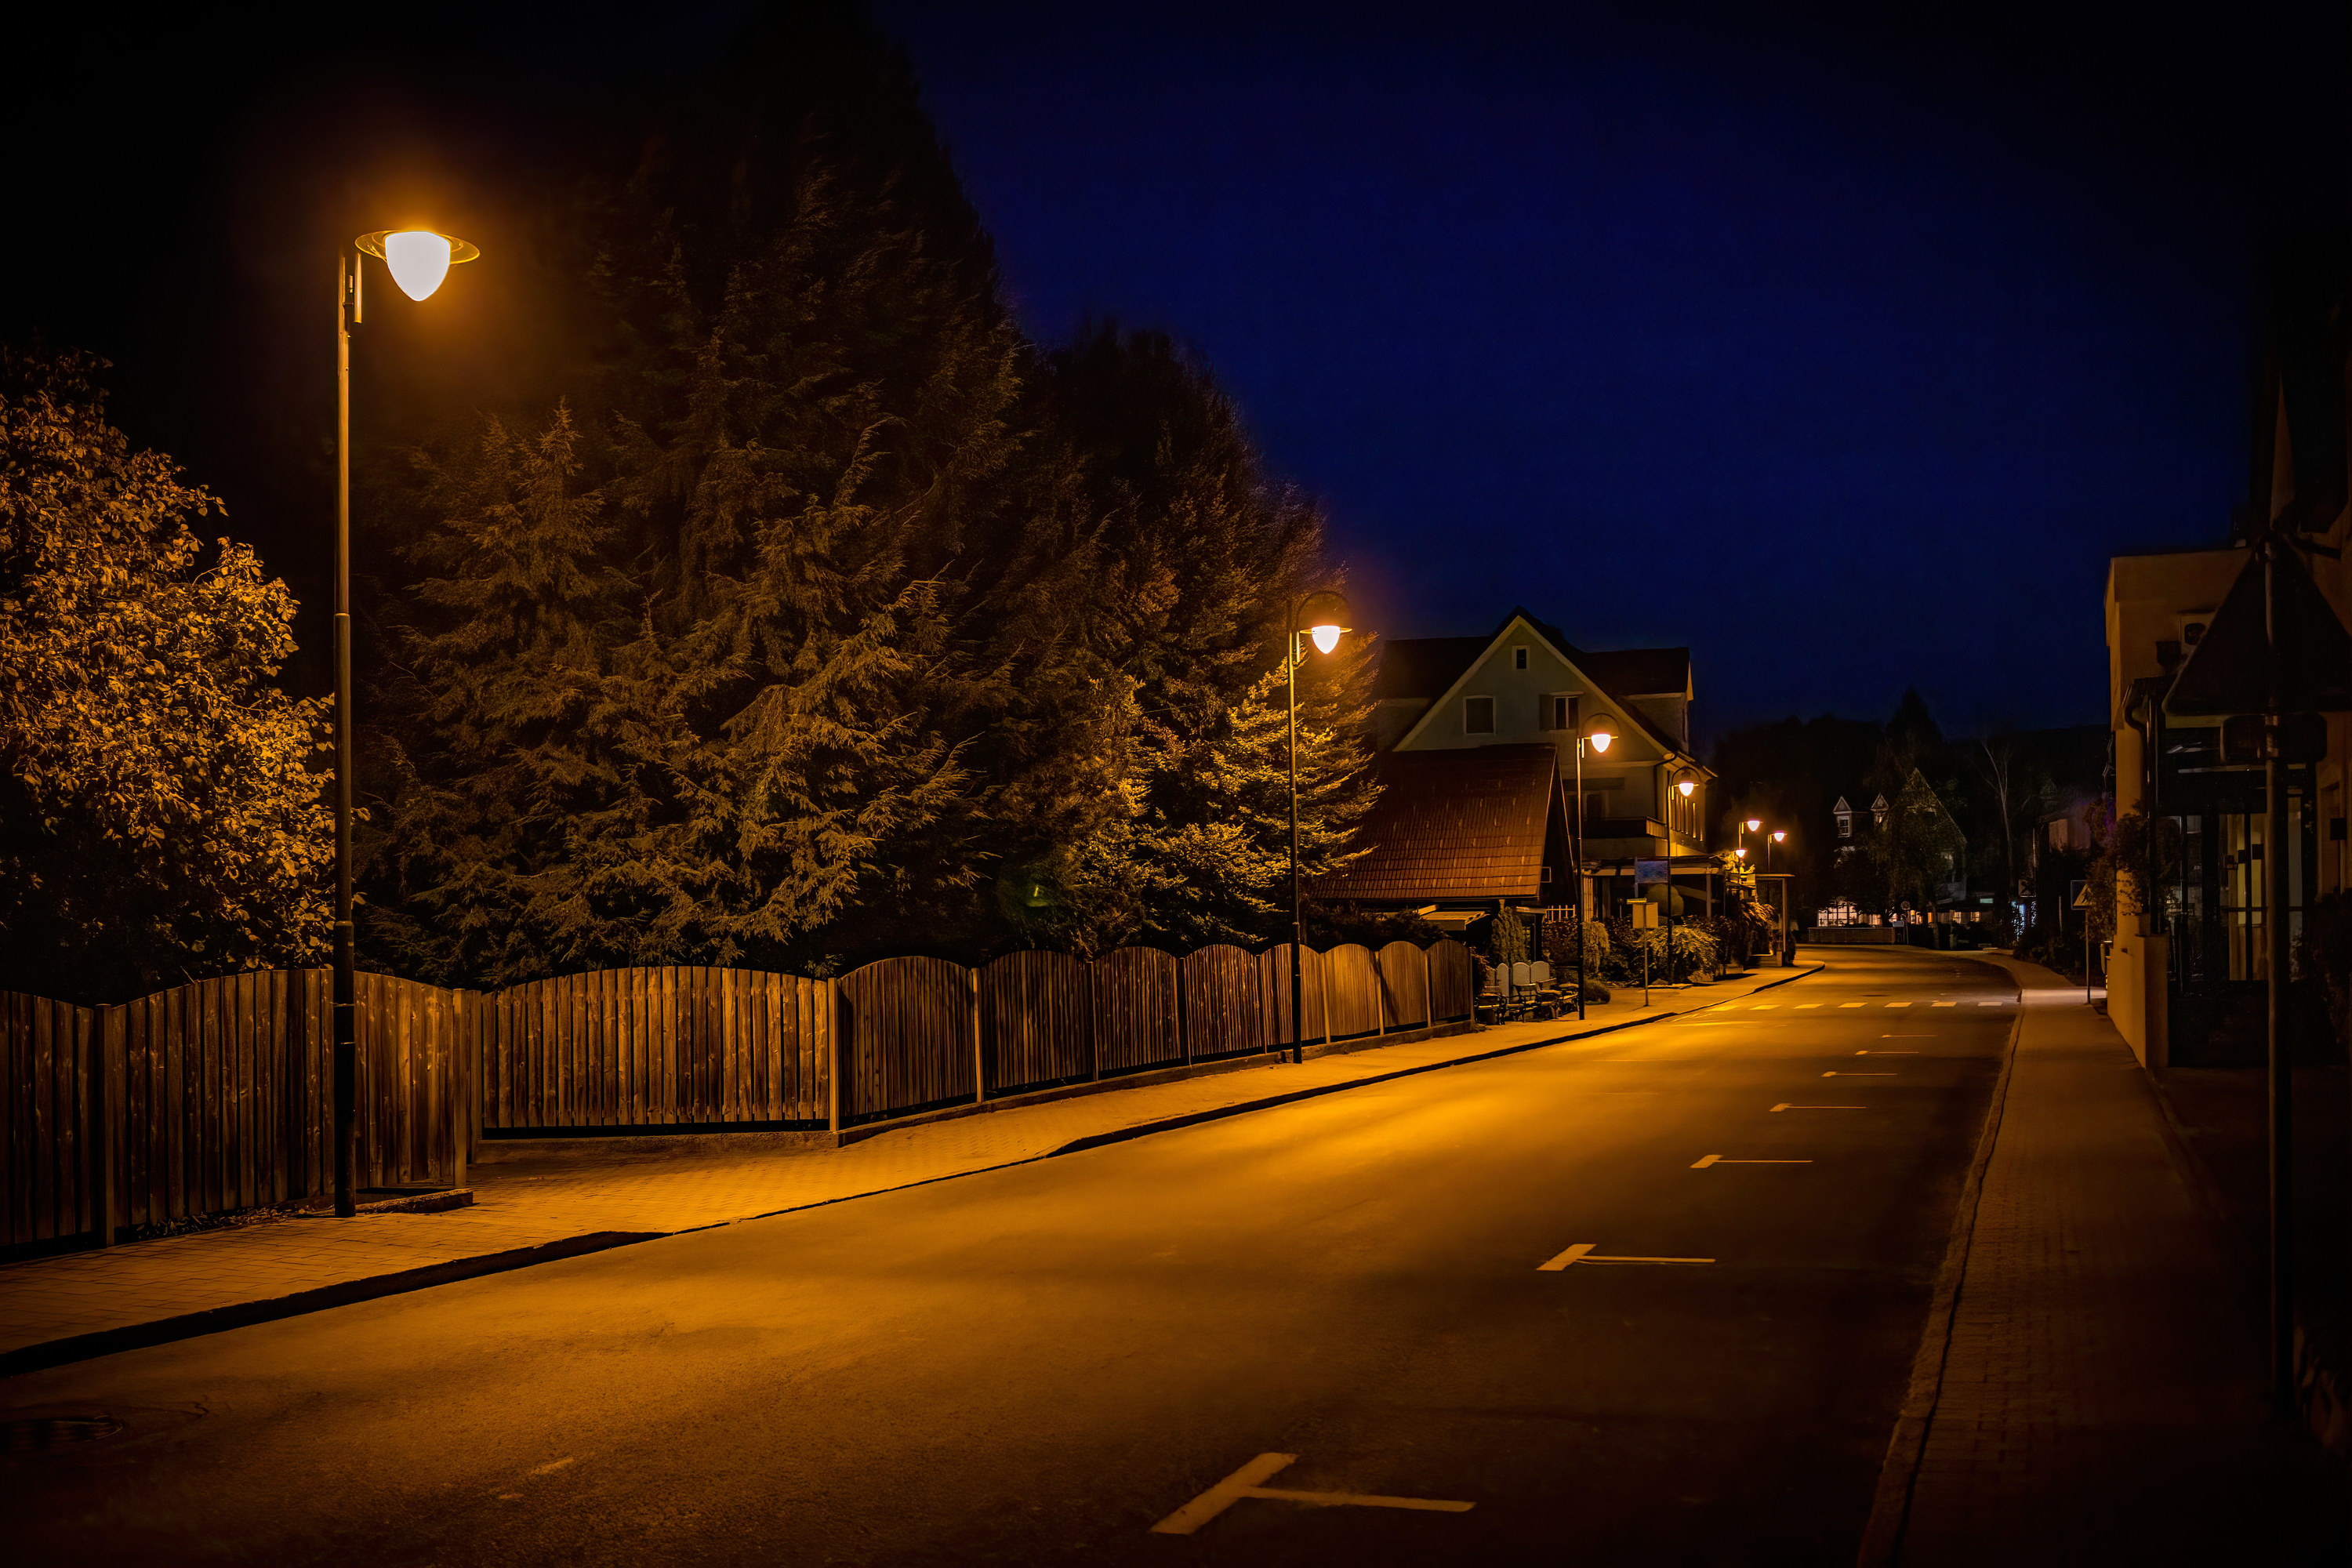 Quiet street late at night, lit by streetlights